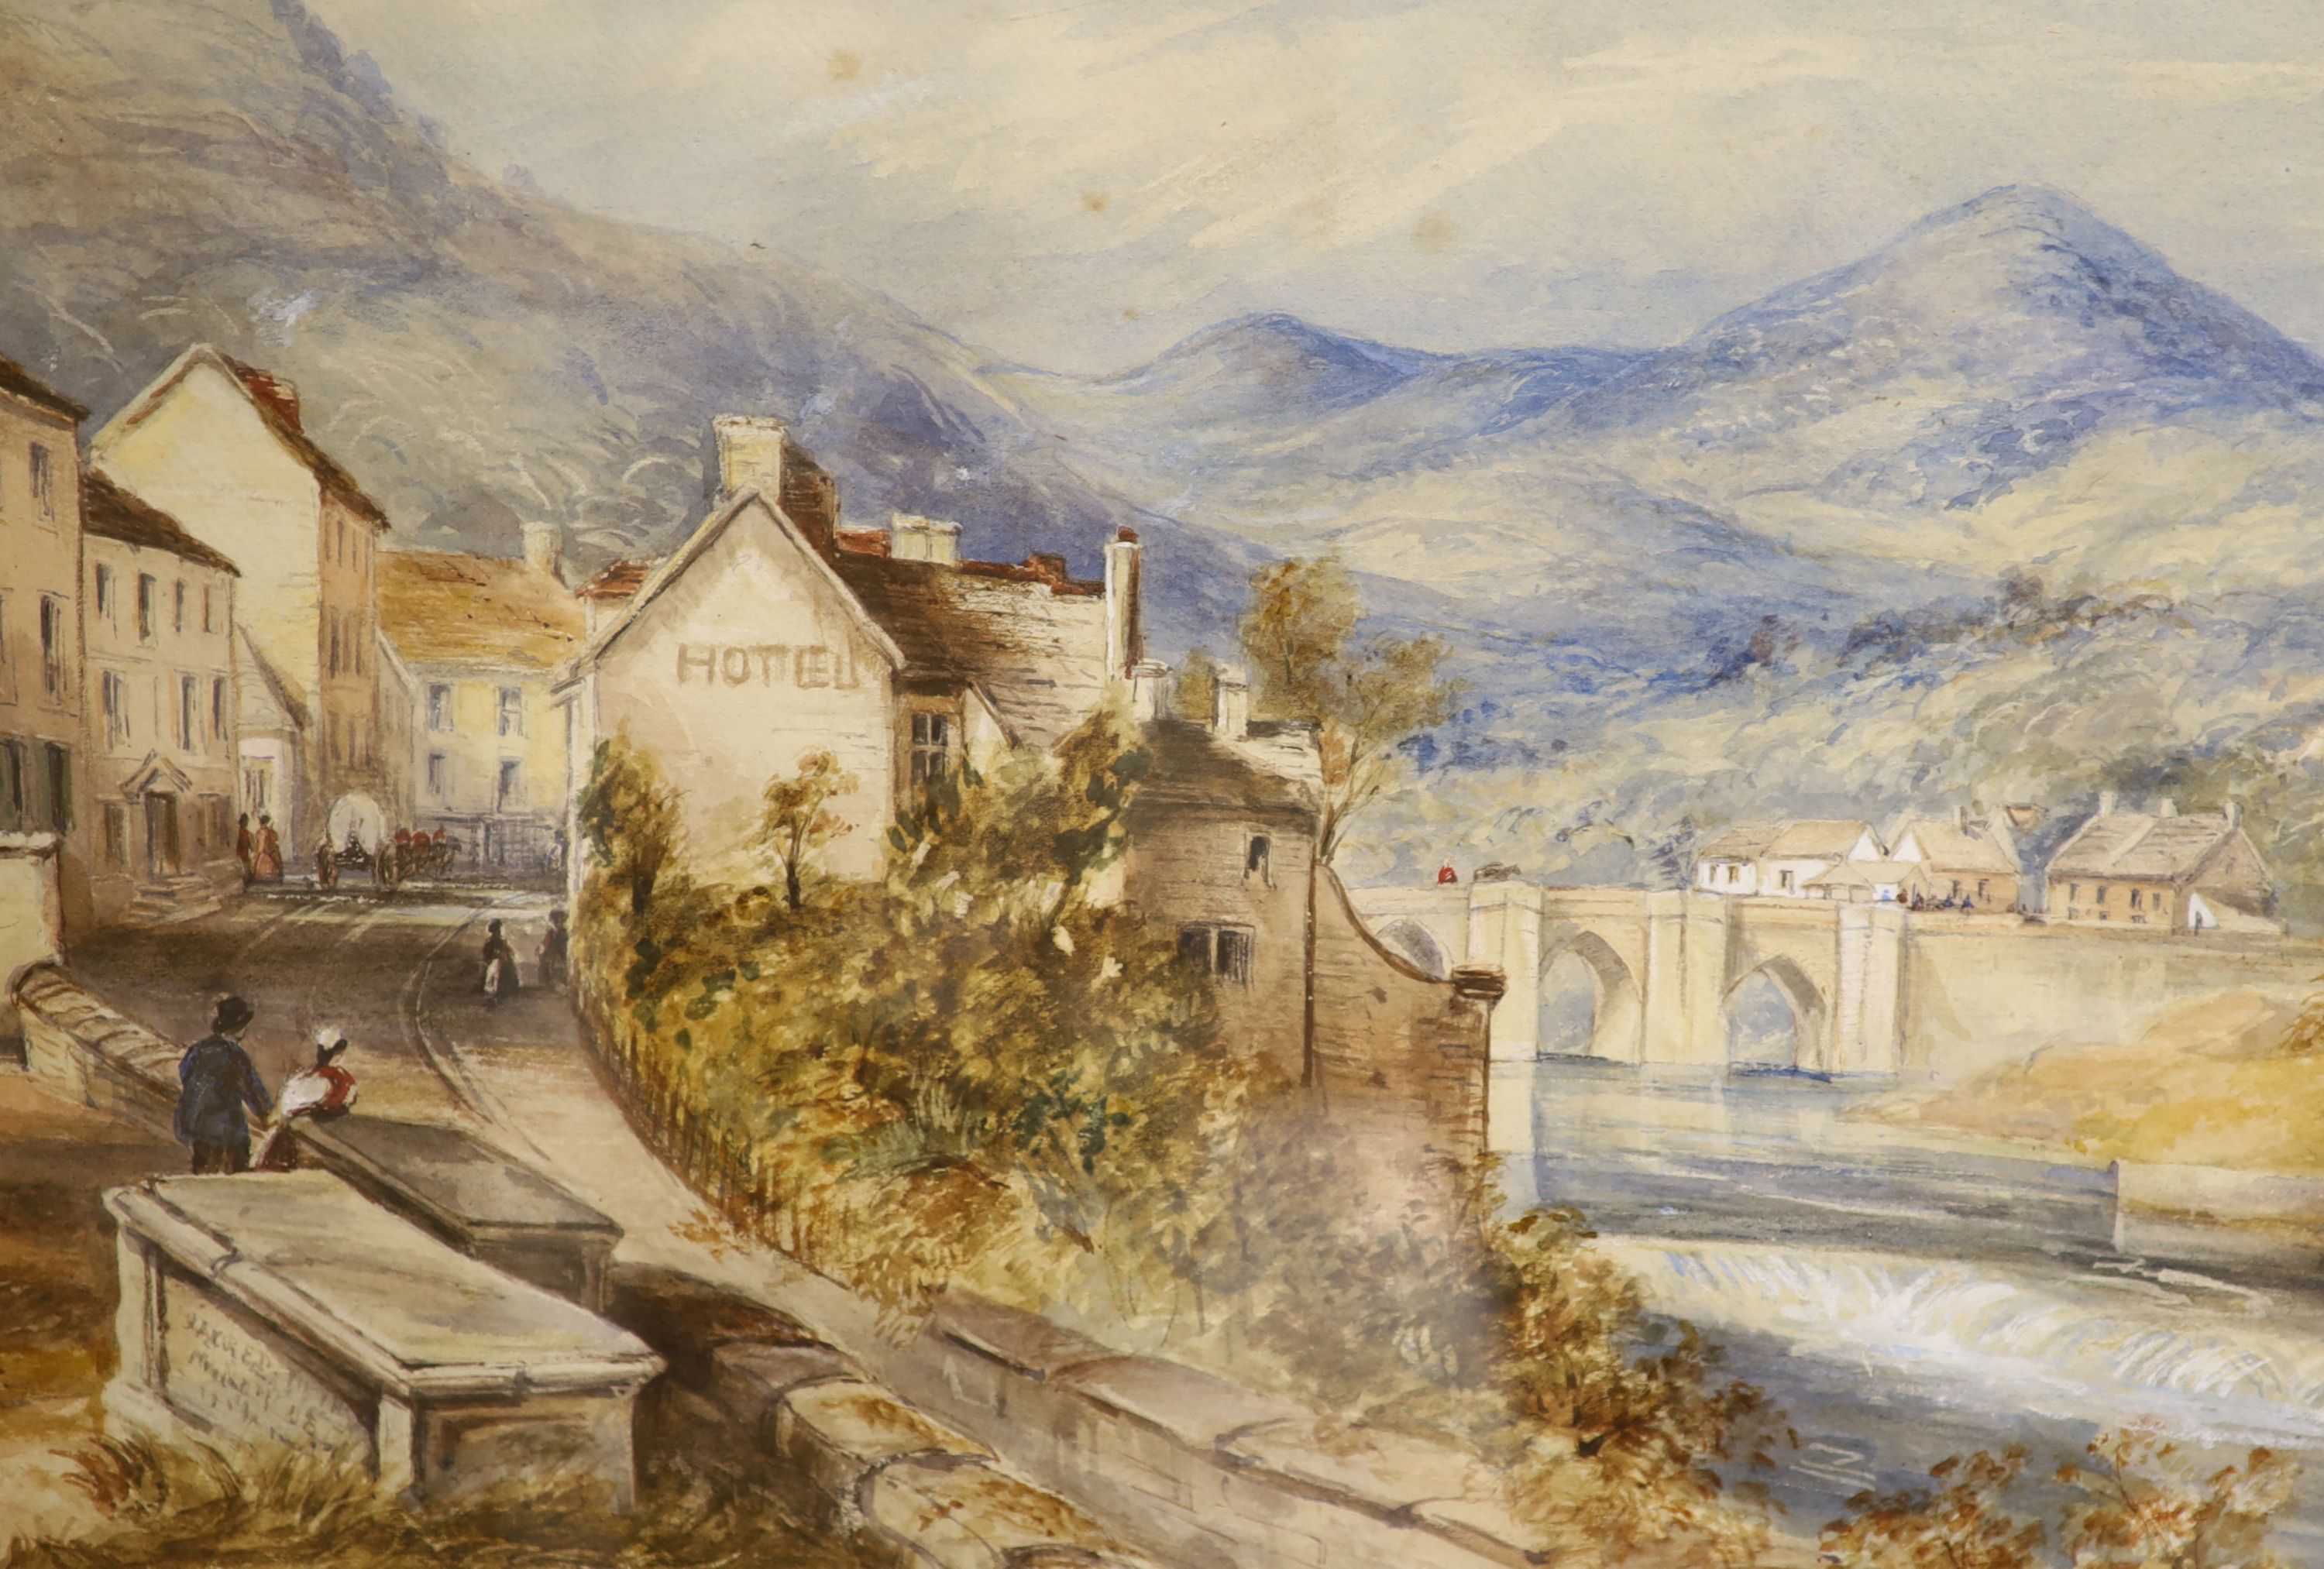 A.M. 19th century, watercolour, The Glen, monogrammed and dated 1863, 31 x 45cm and a 19th century English School, watercolour, Riverside country town, 30 x 44cm